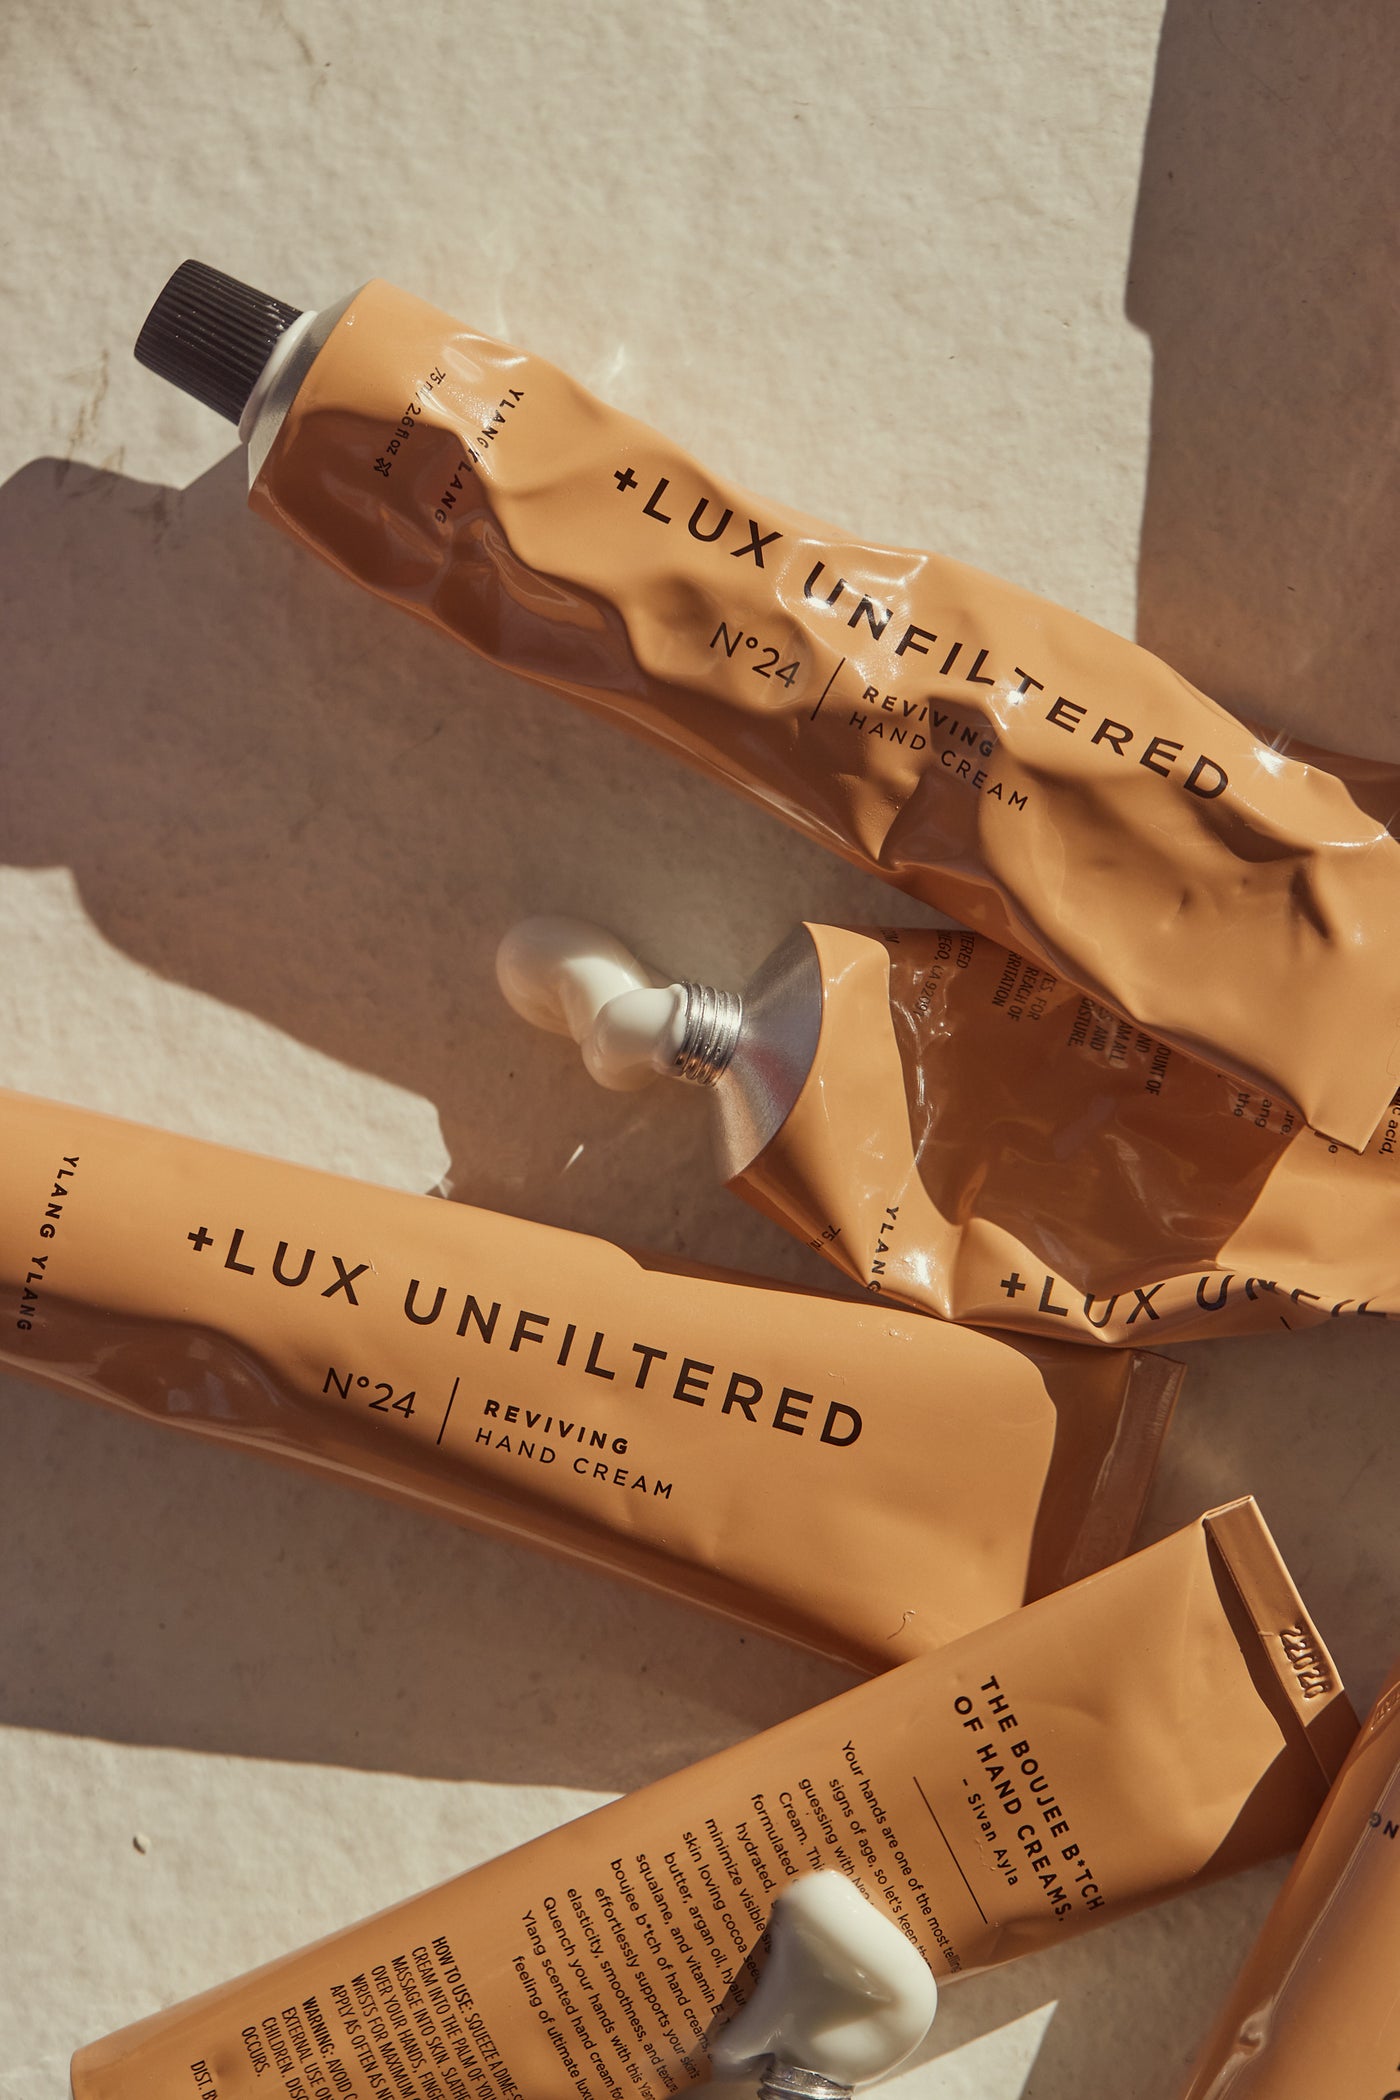 N°24 Reviving Hand Cream - + LUX UNFILTERED